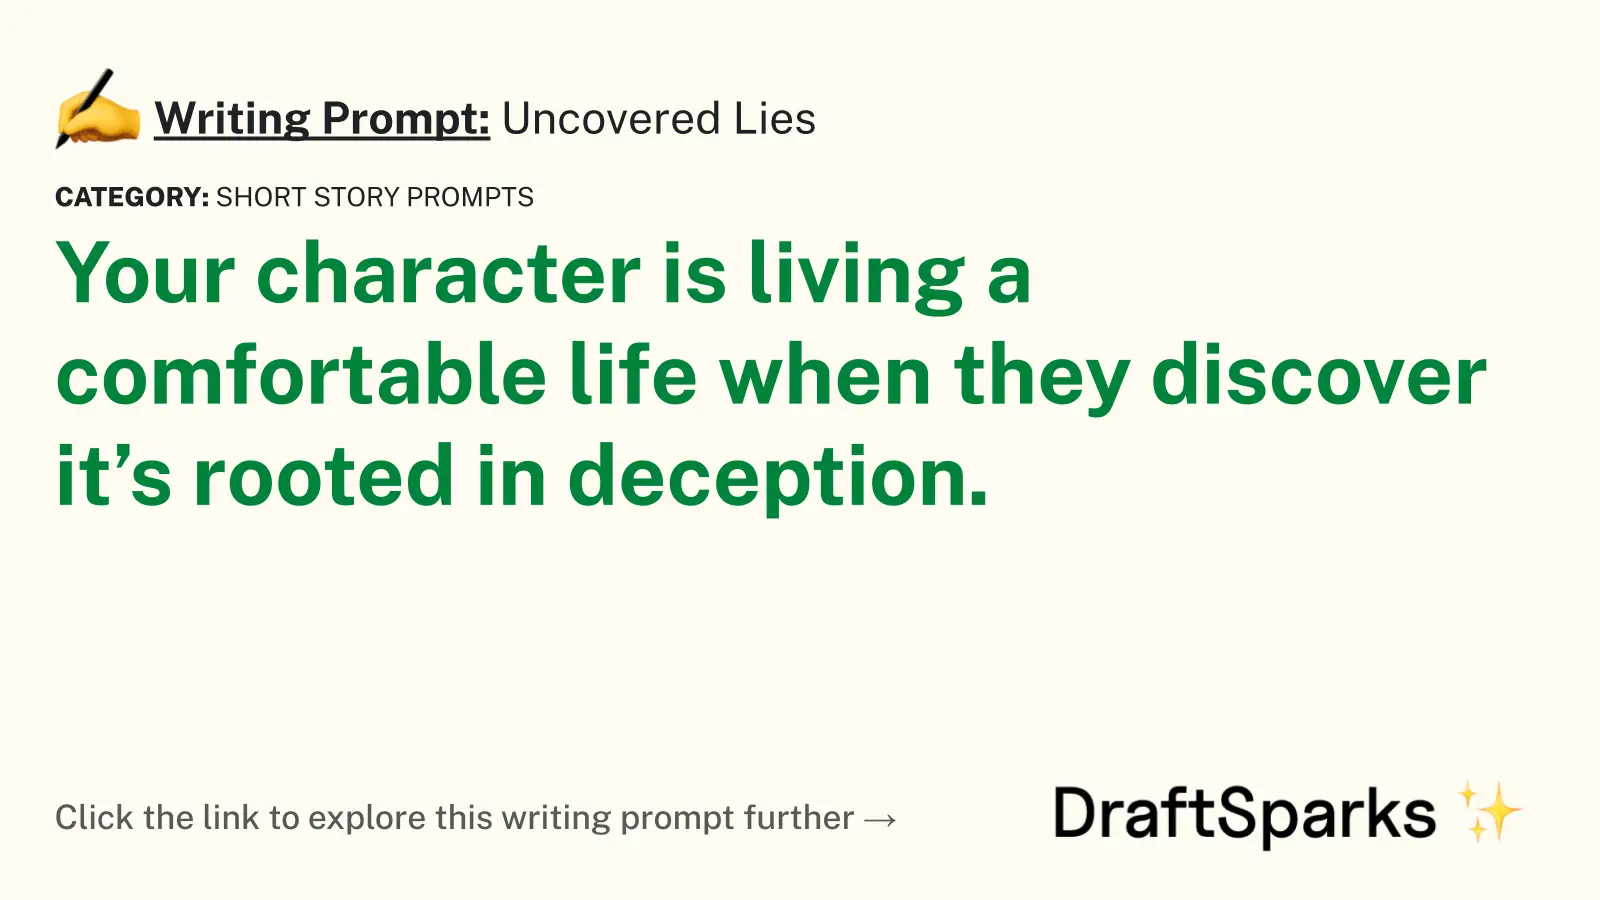 Uncovered Lies